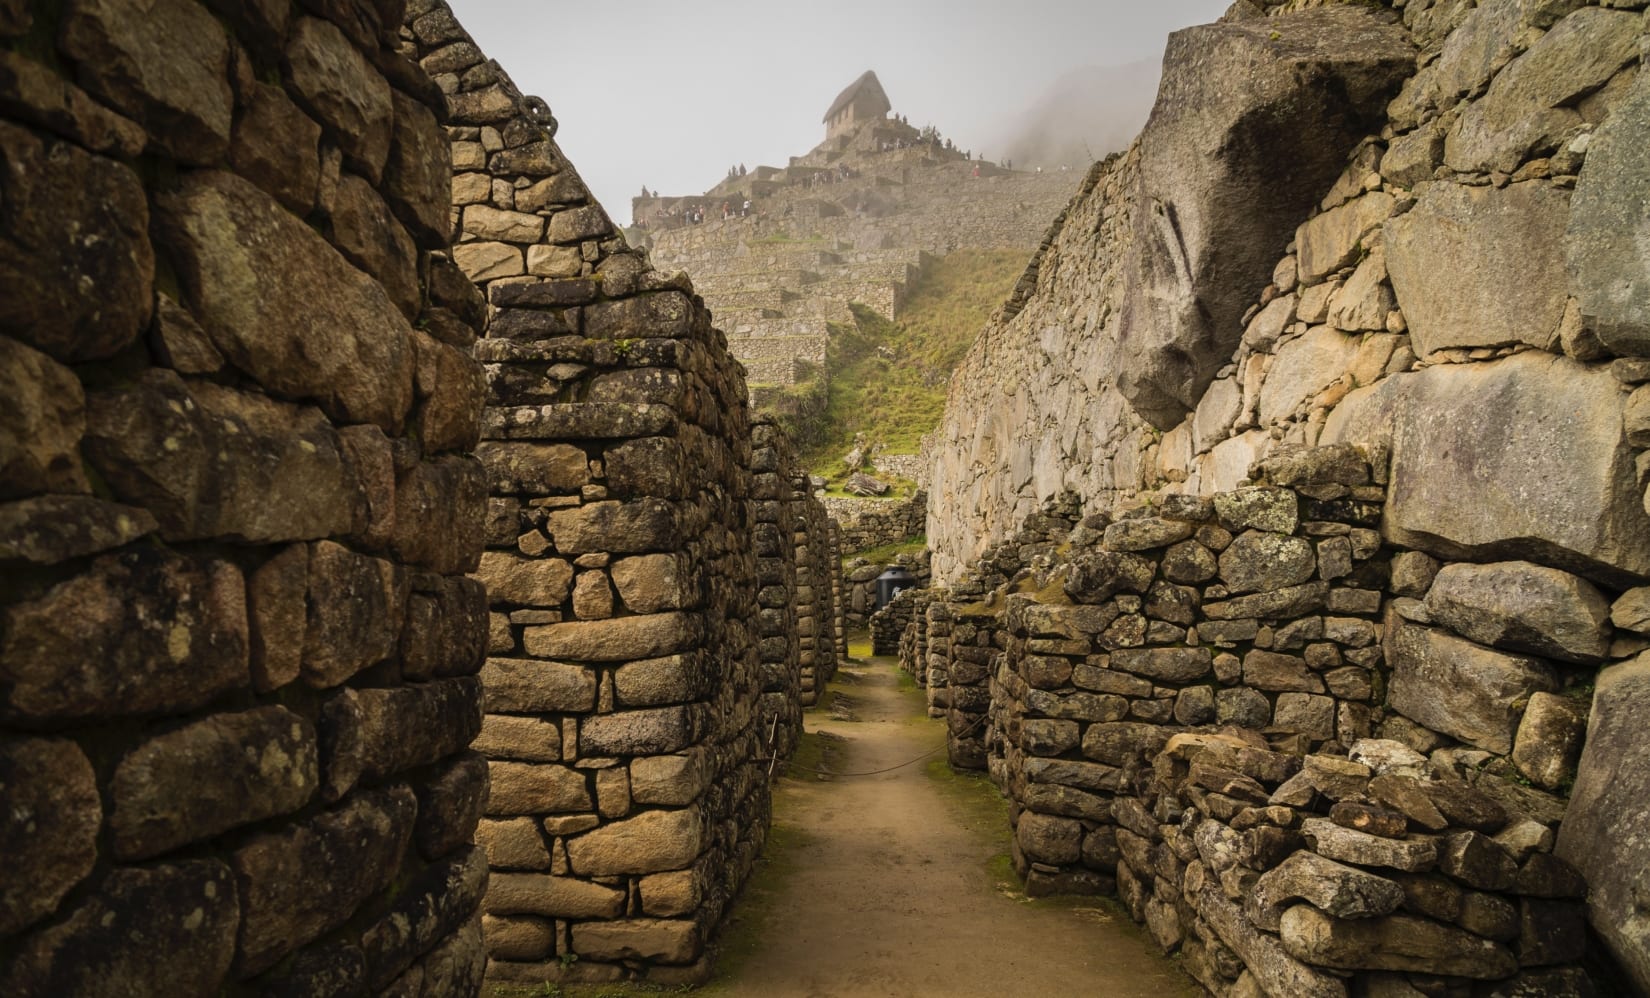 A photograph taken inside some stony ruins at the Machu Picchu site, looking down a hallway